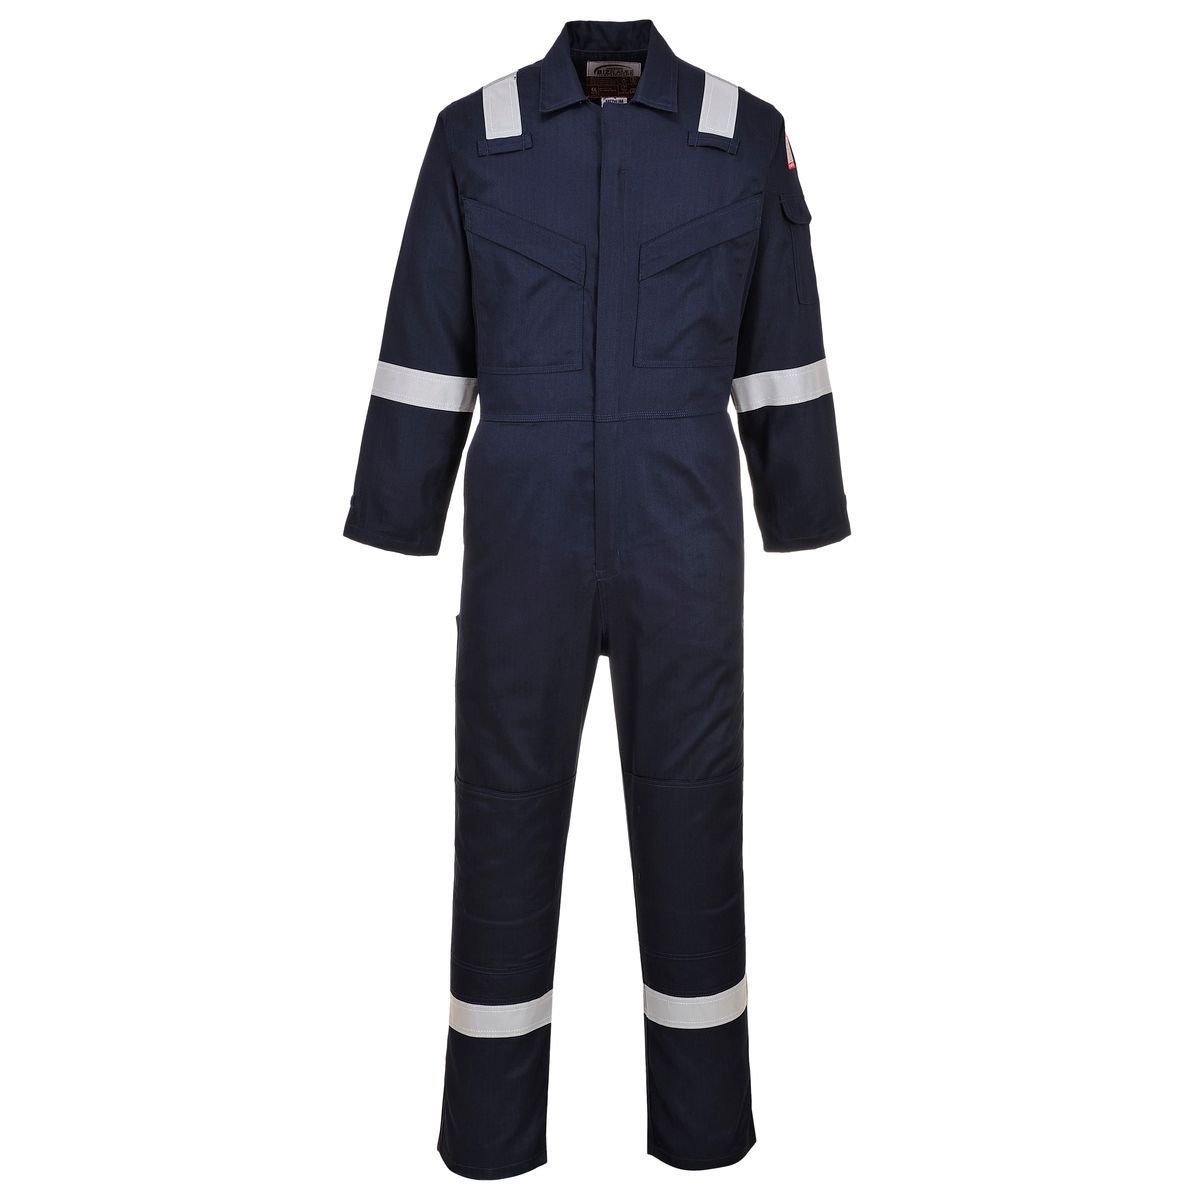 Style UFR21 FR Antistatic Coverall-1